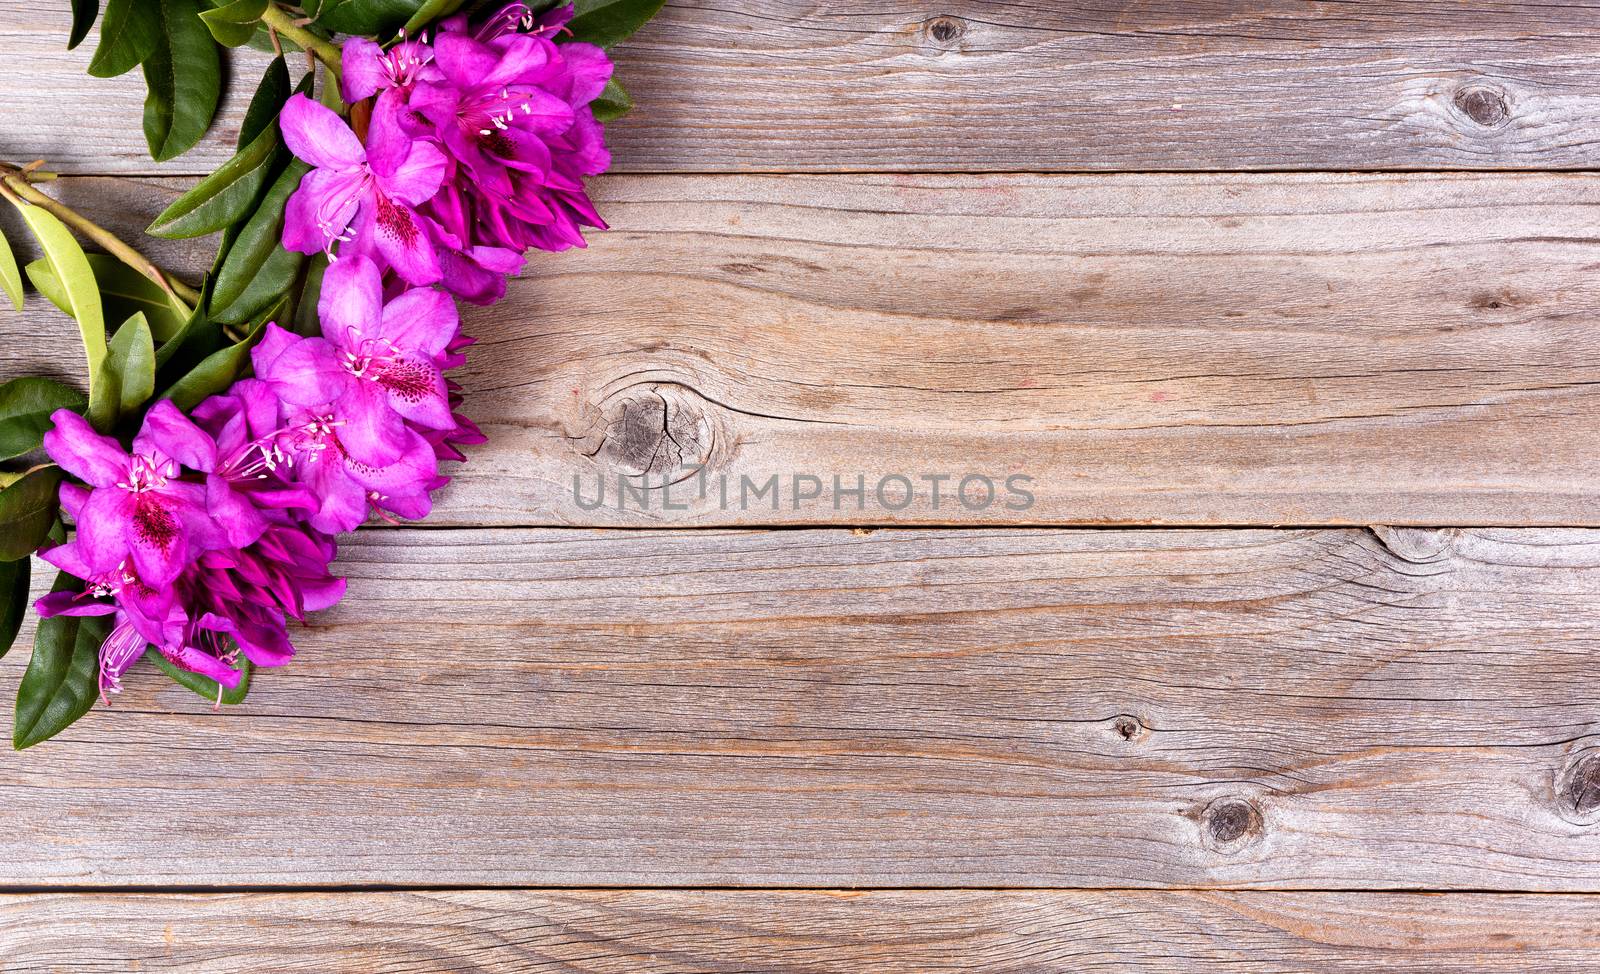 Seasonal wild rhododendron flowers on rustic wooden boards  by tab1962